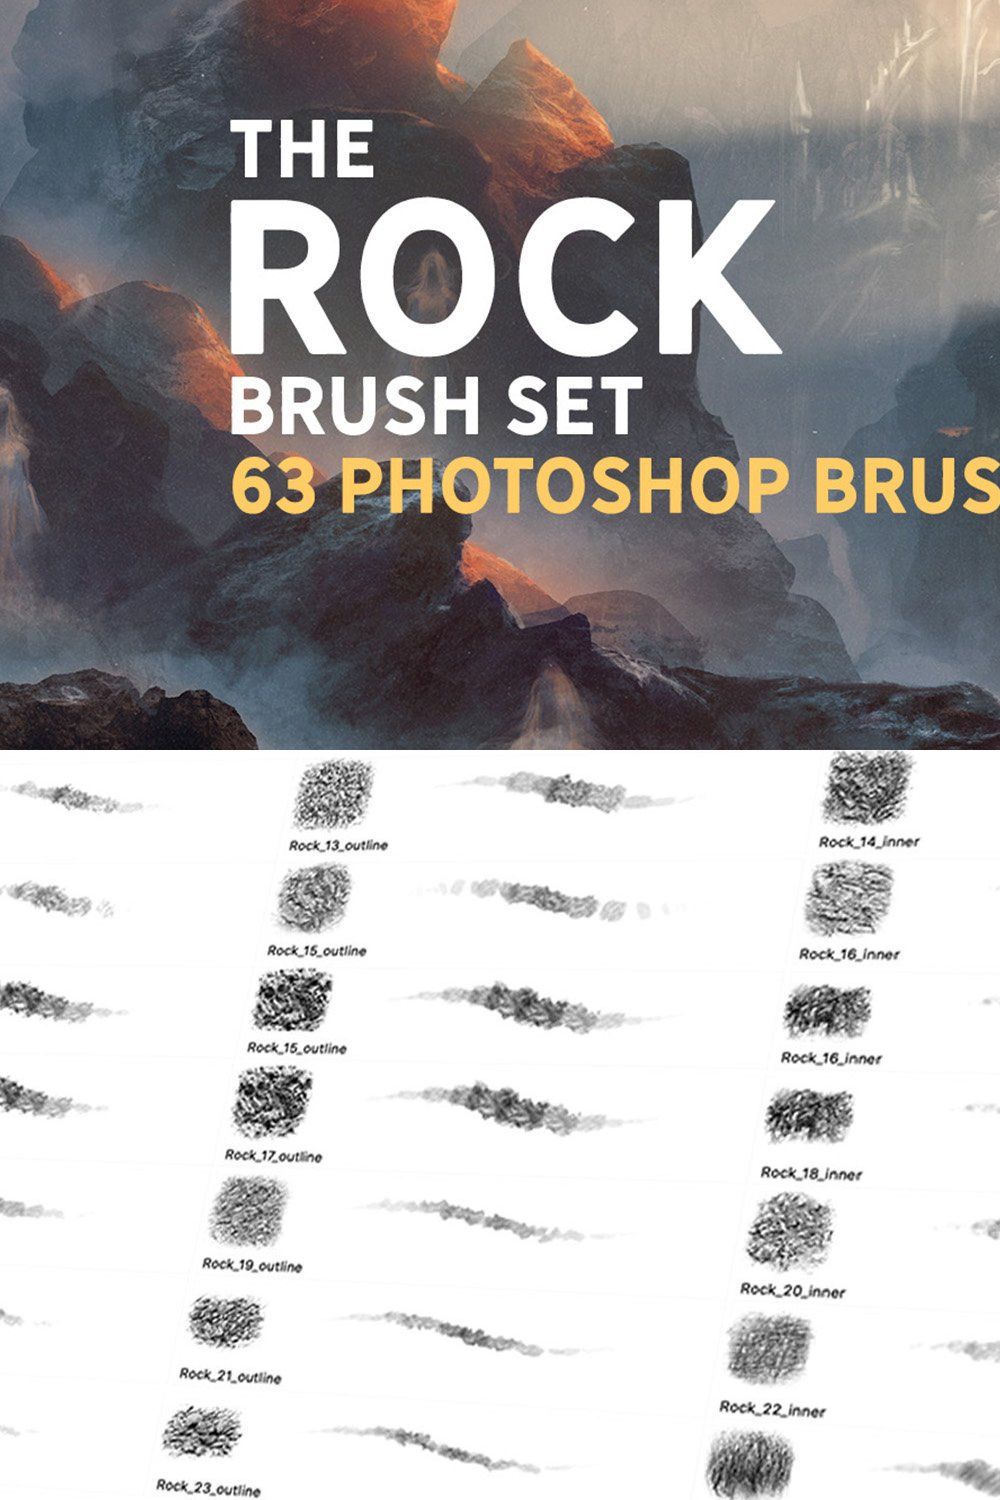 The Rock brush set pinterest preview image.